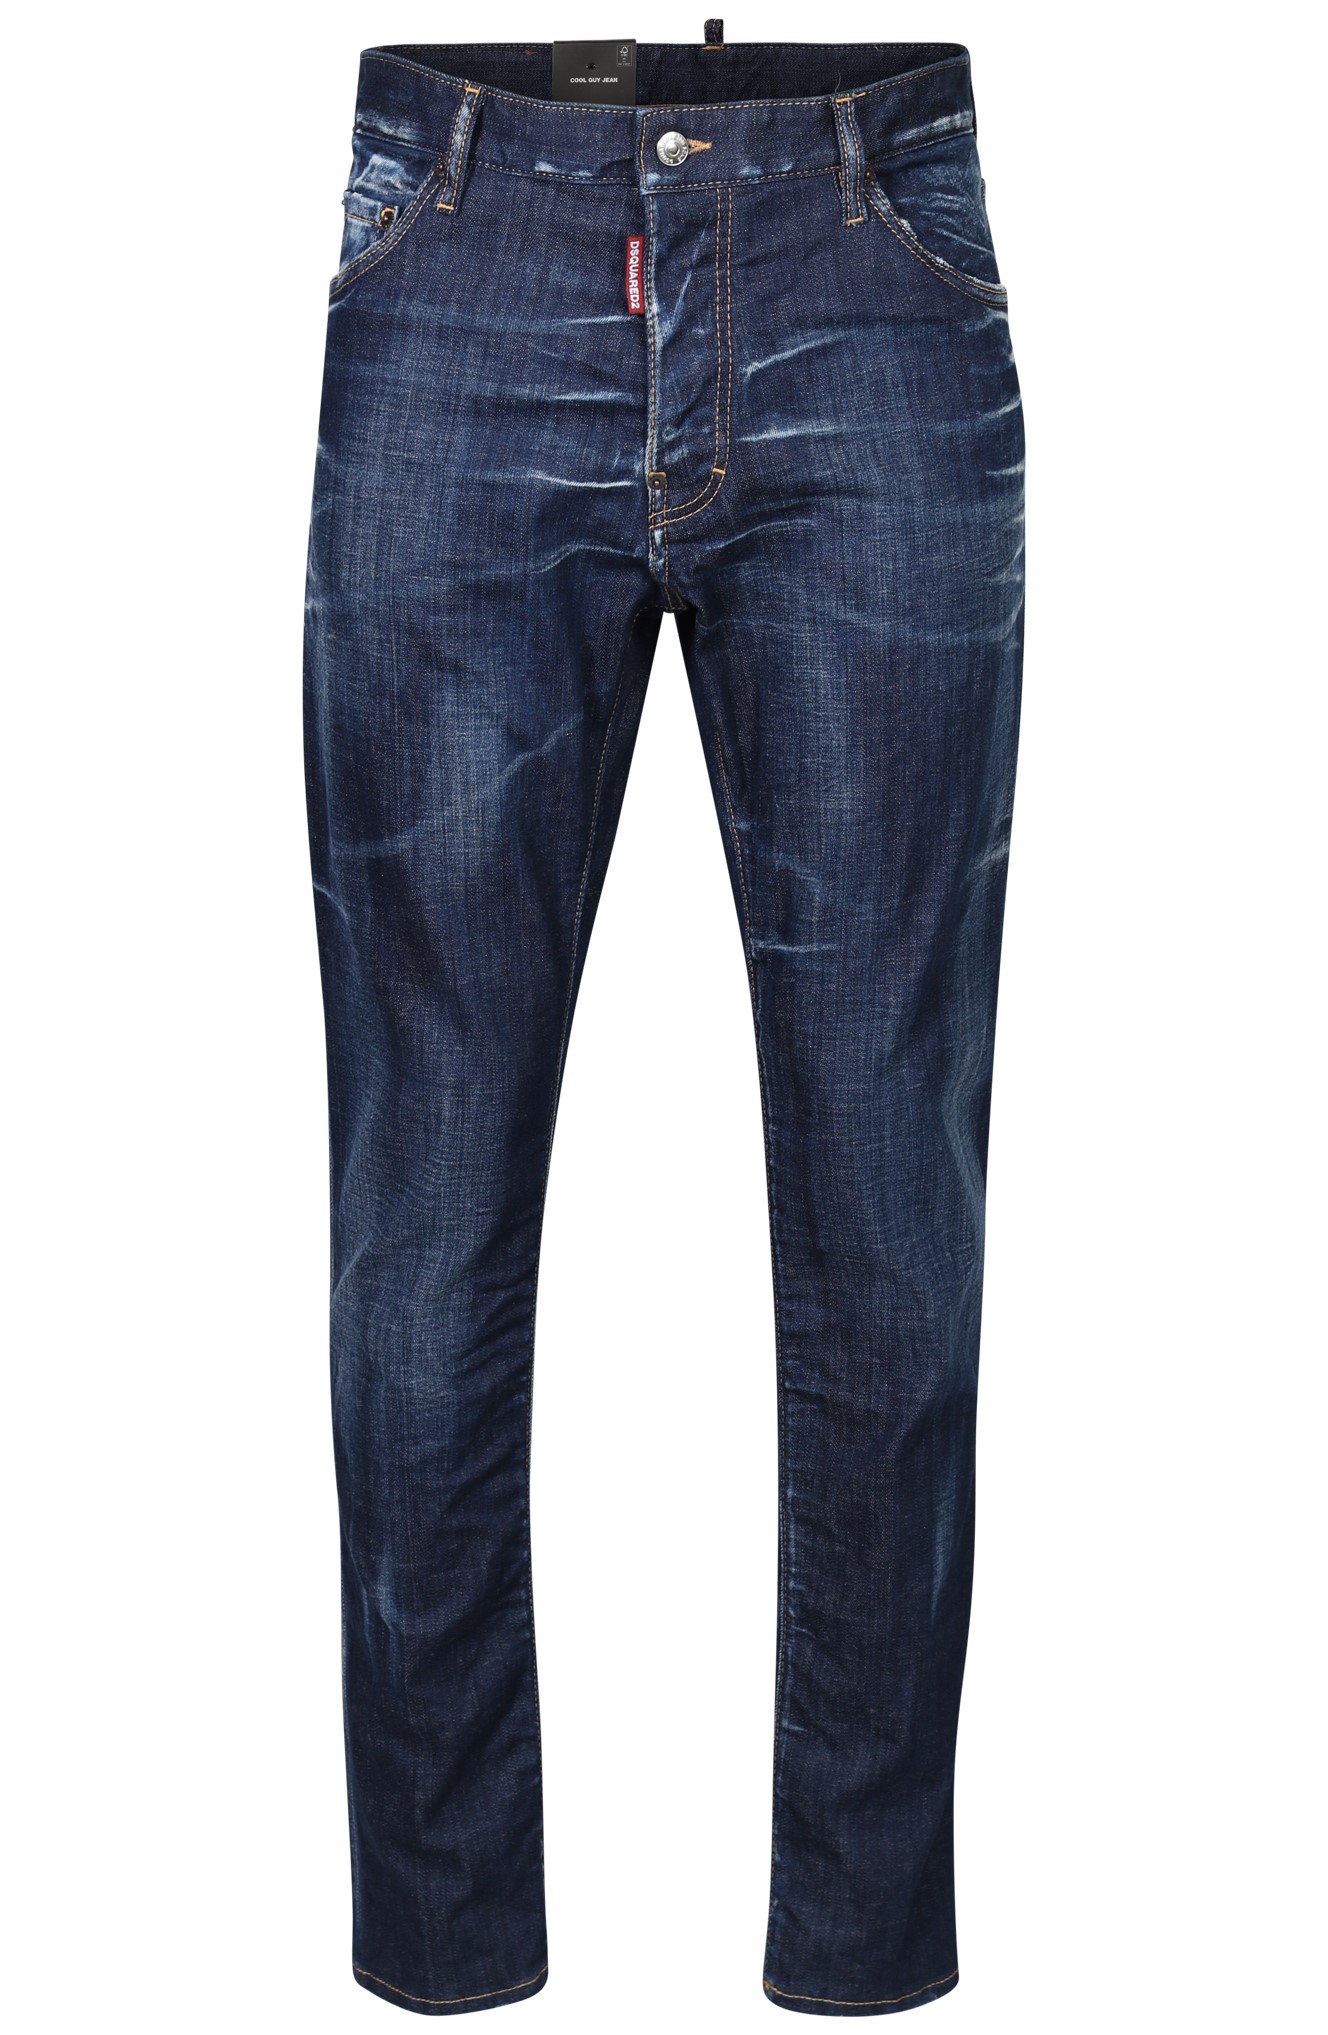 DSQUARED2 Cool Guy Jeans in Washed Dark Blue 52